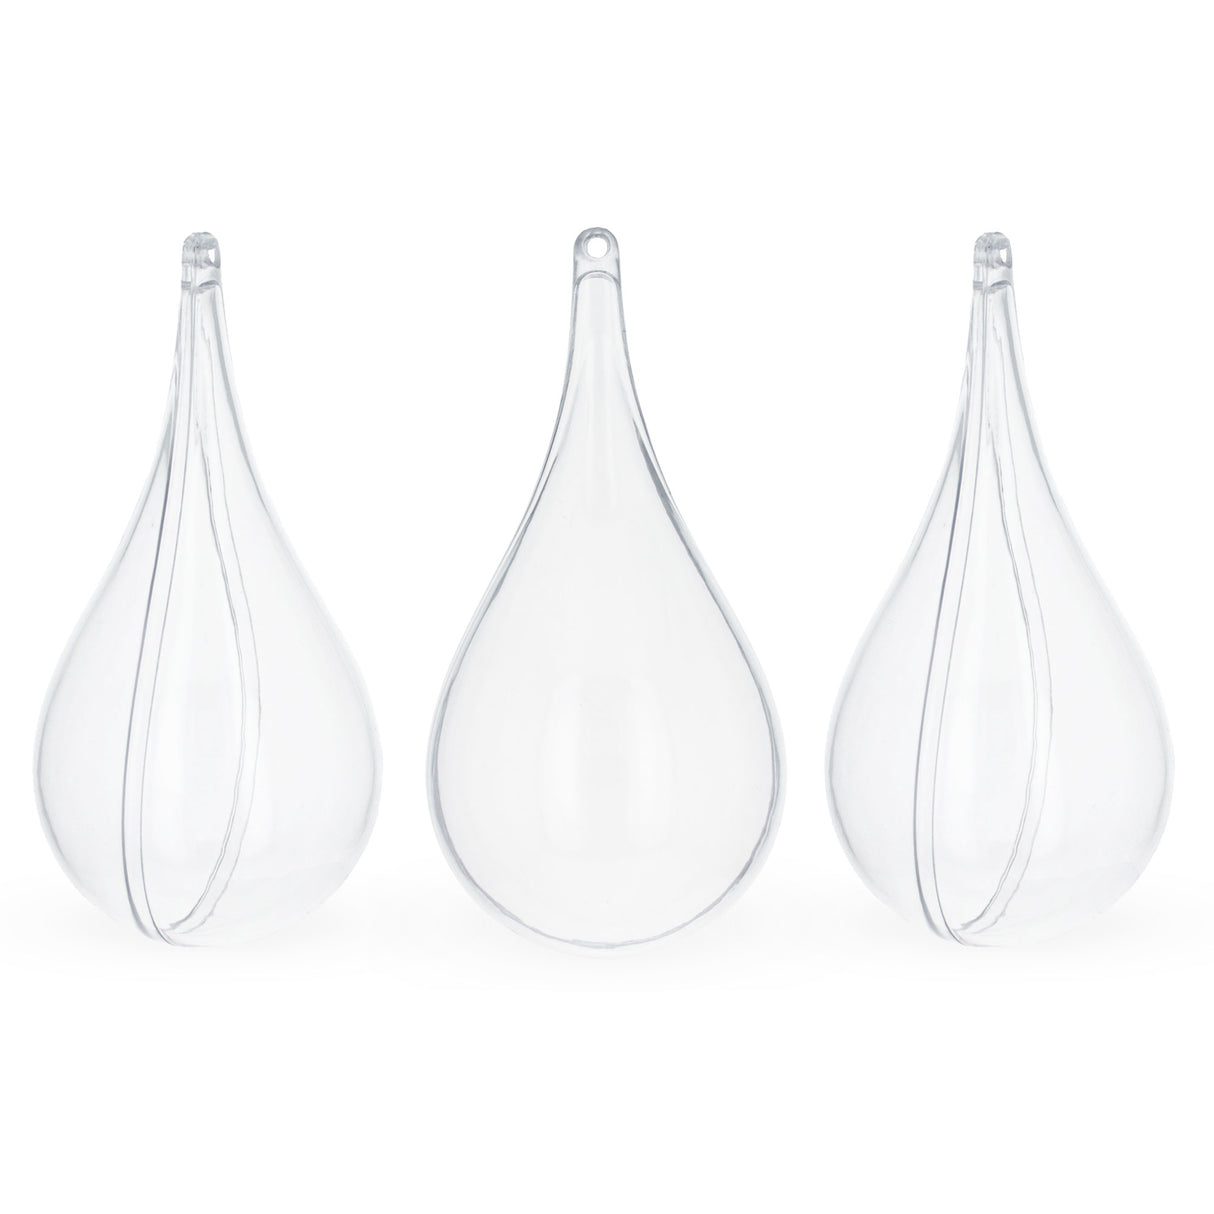 Plastic Set of 3 Clear Plastic Waterdrop Ornaments 4.3 Inches (109 mm) in Clear color